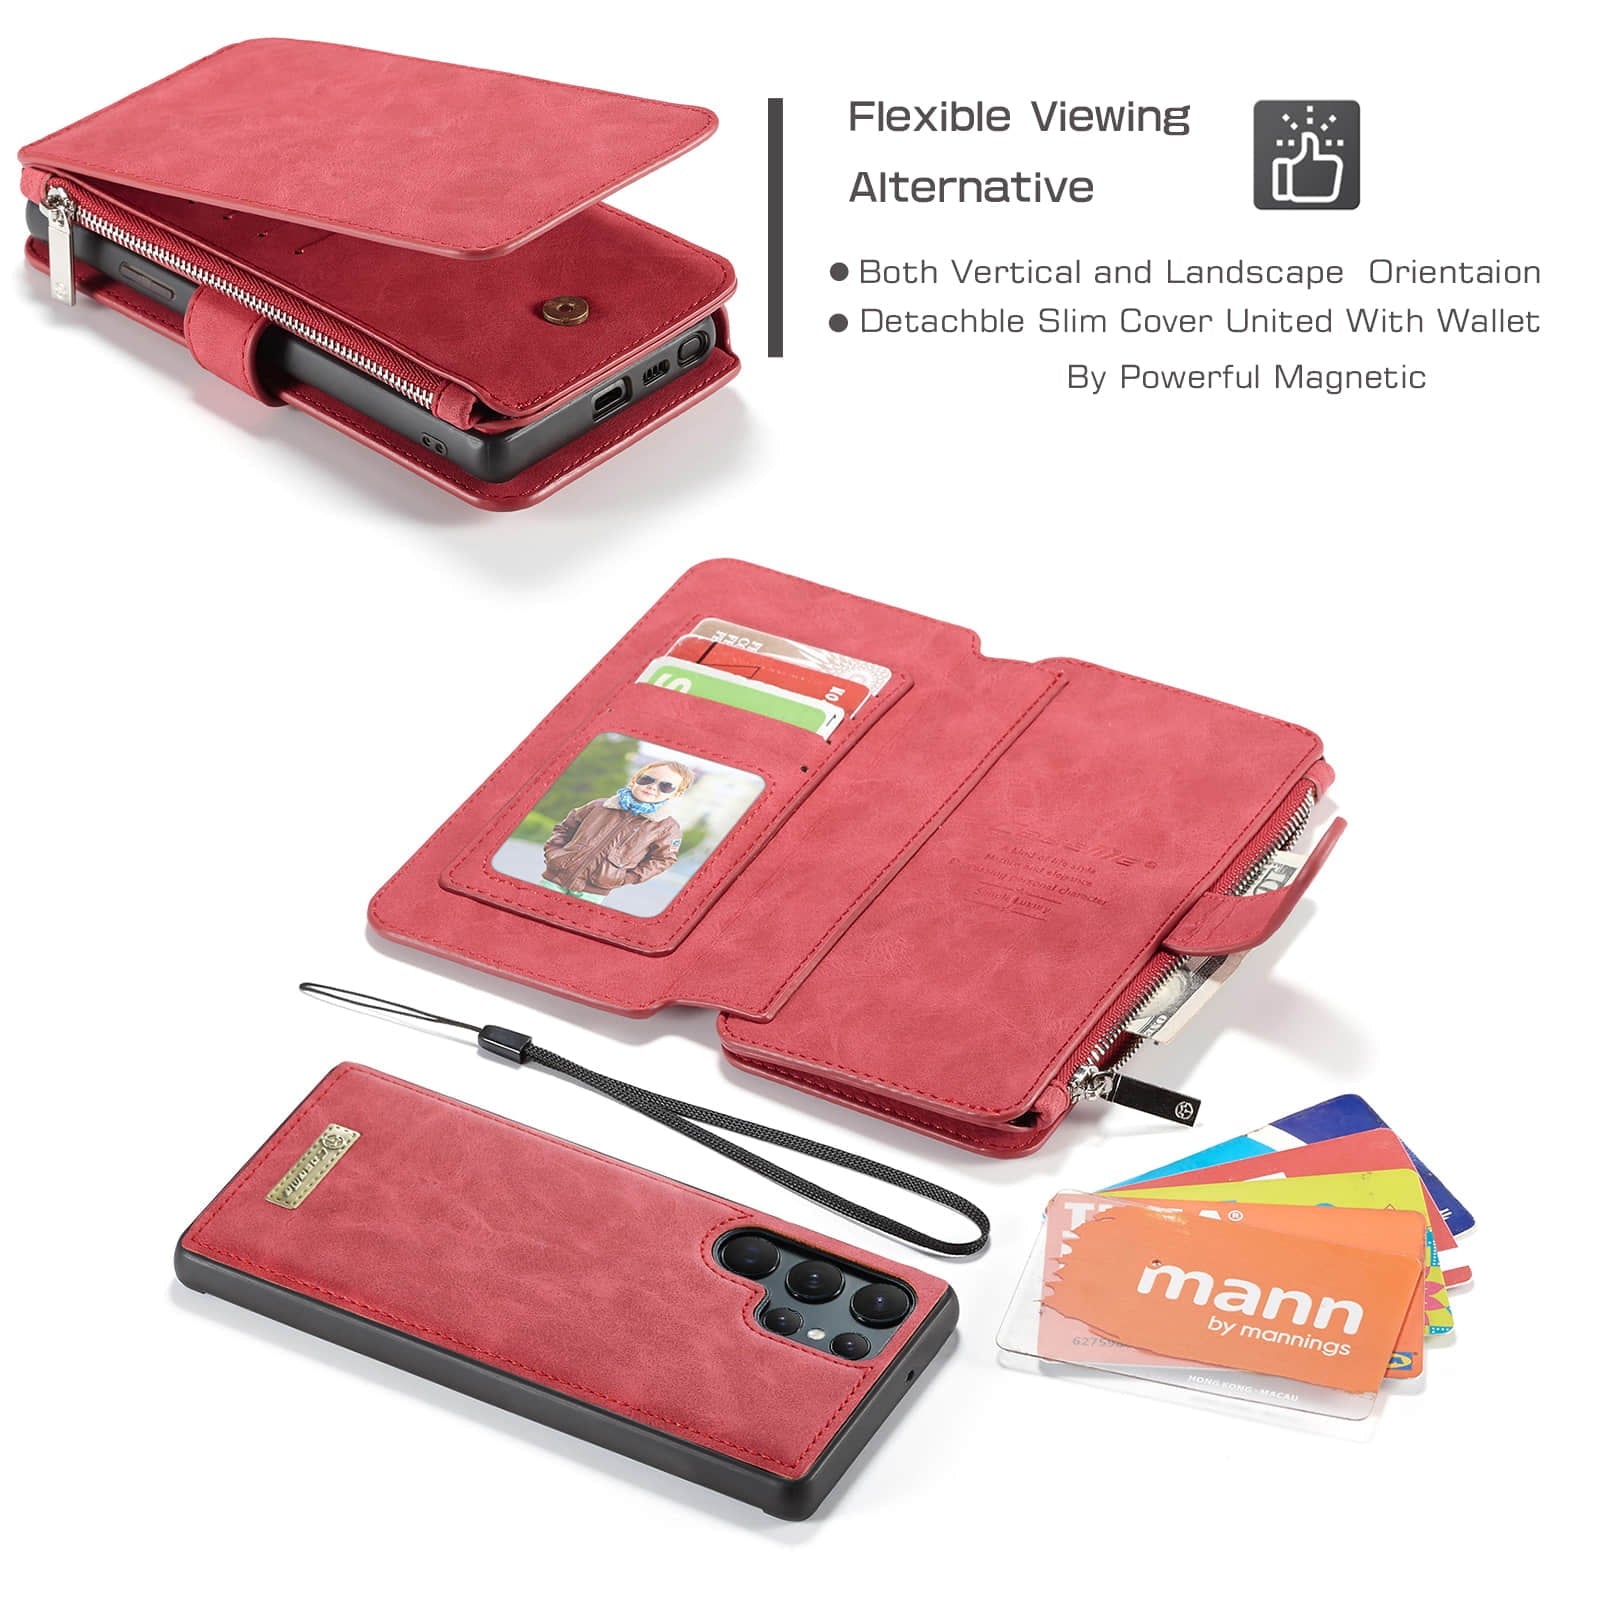 Caeouts Zipper Cardholder Leather Wallet Phone Case Red